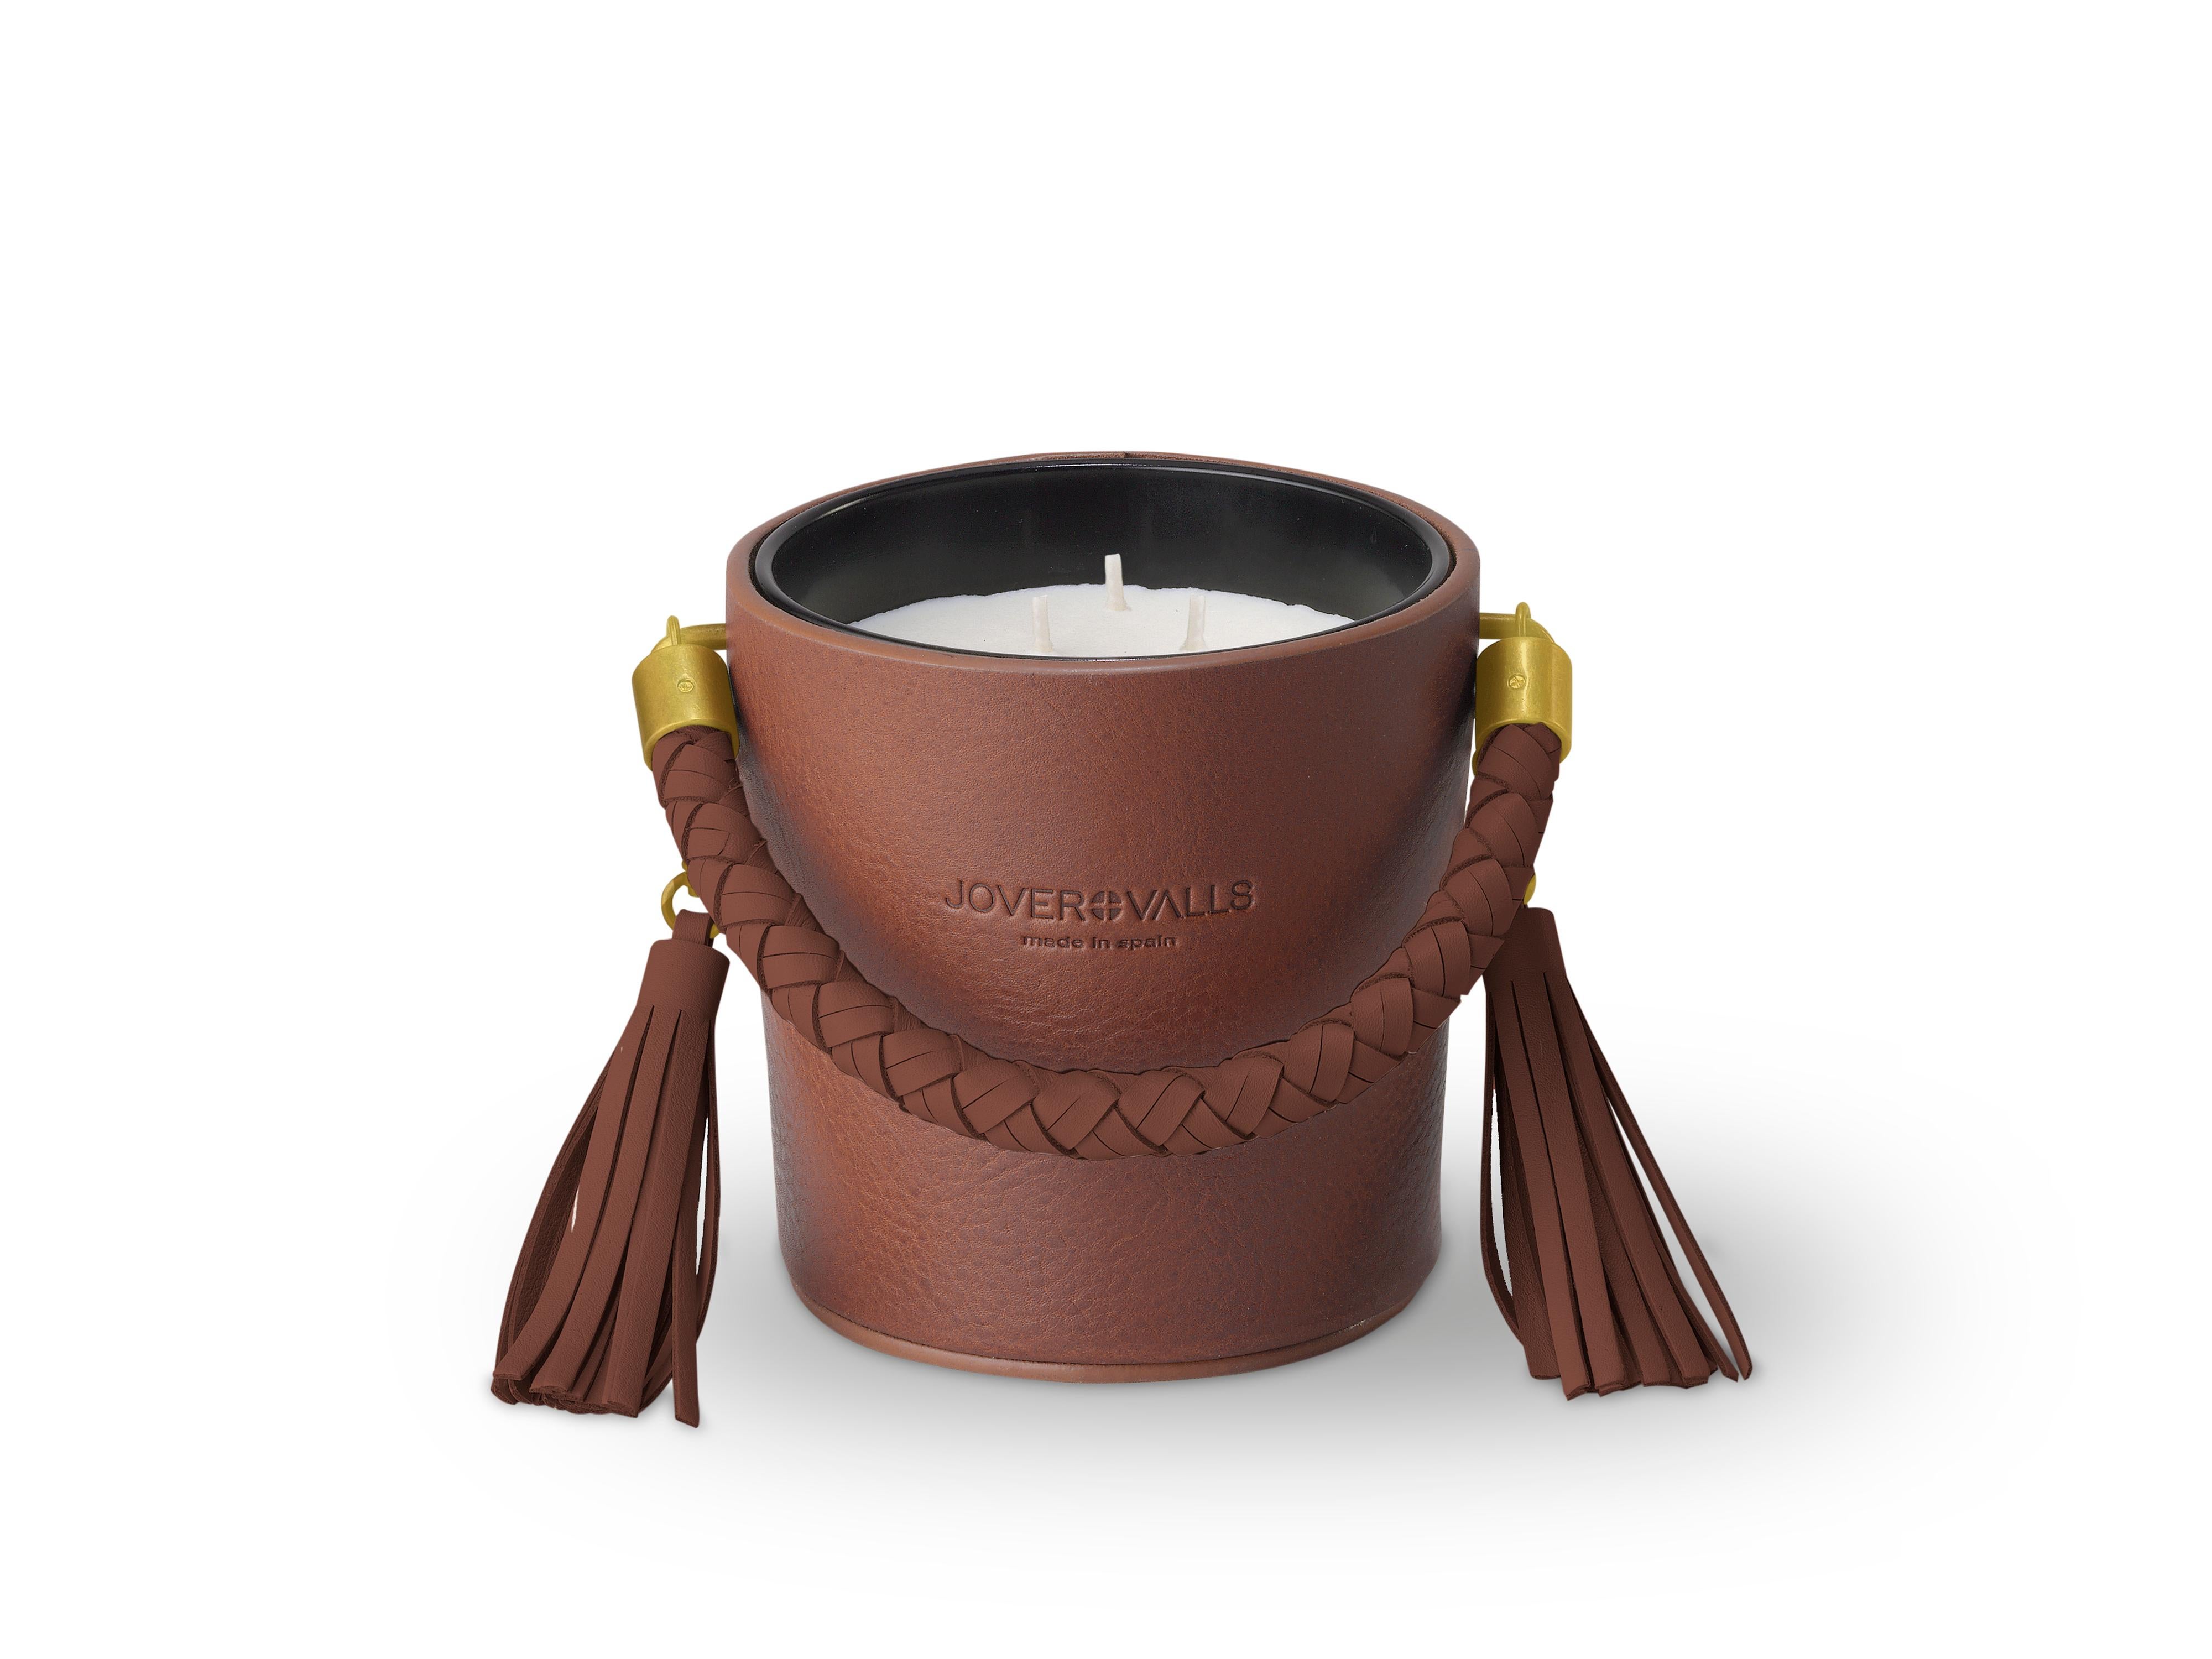 Bucket, Dark Brown Leather Candleholder, Oud Wood & Roses Scented Candle 21 Oz.  In New Condition For Sale In Alcoy, Alicante